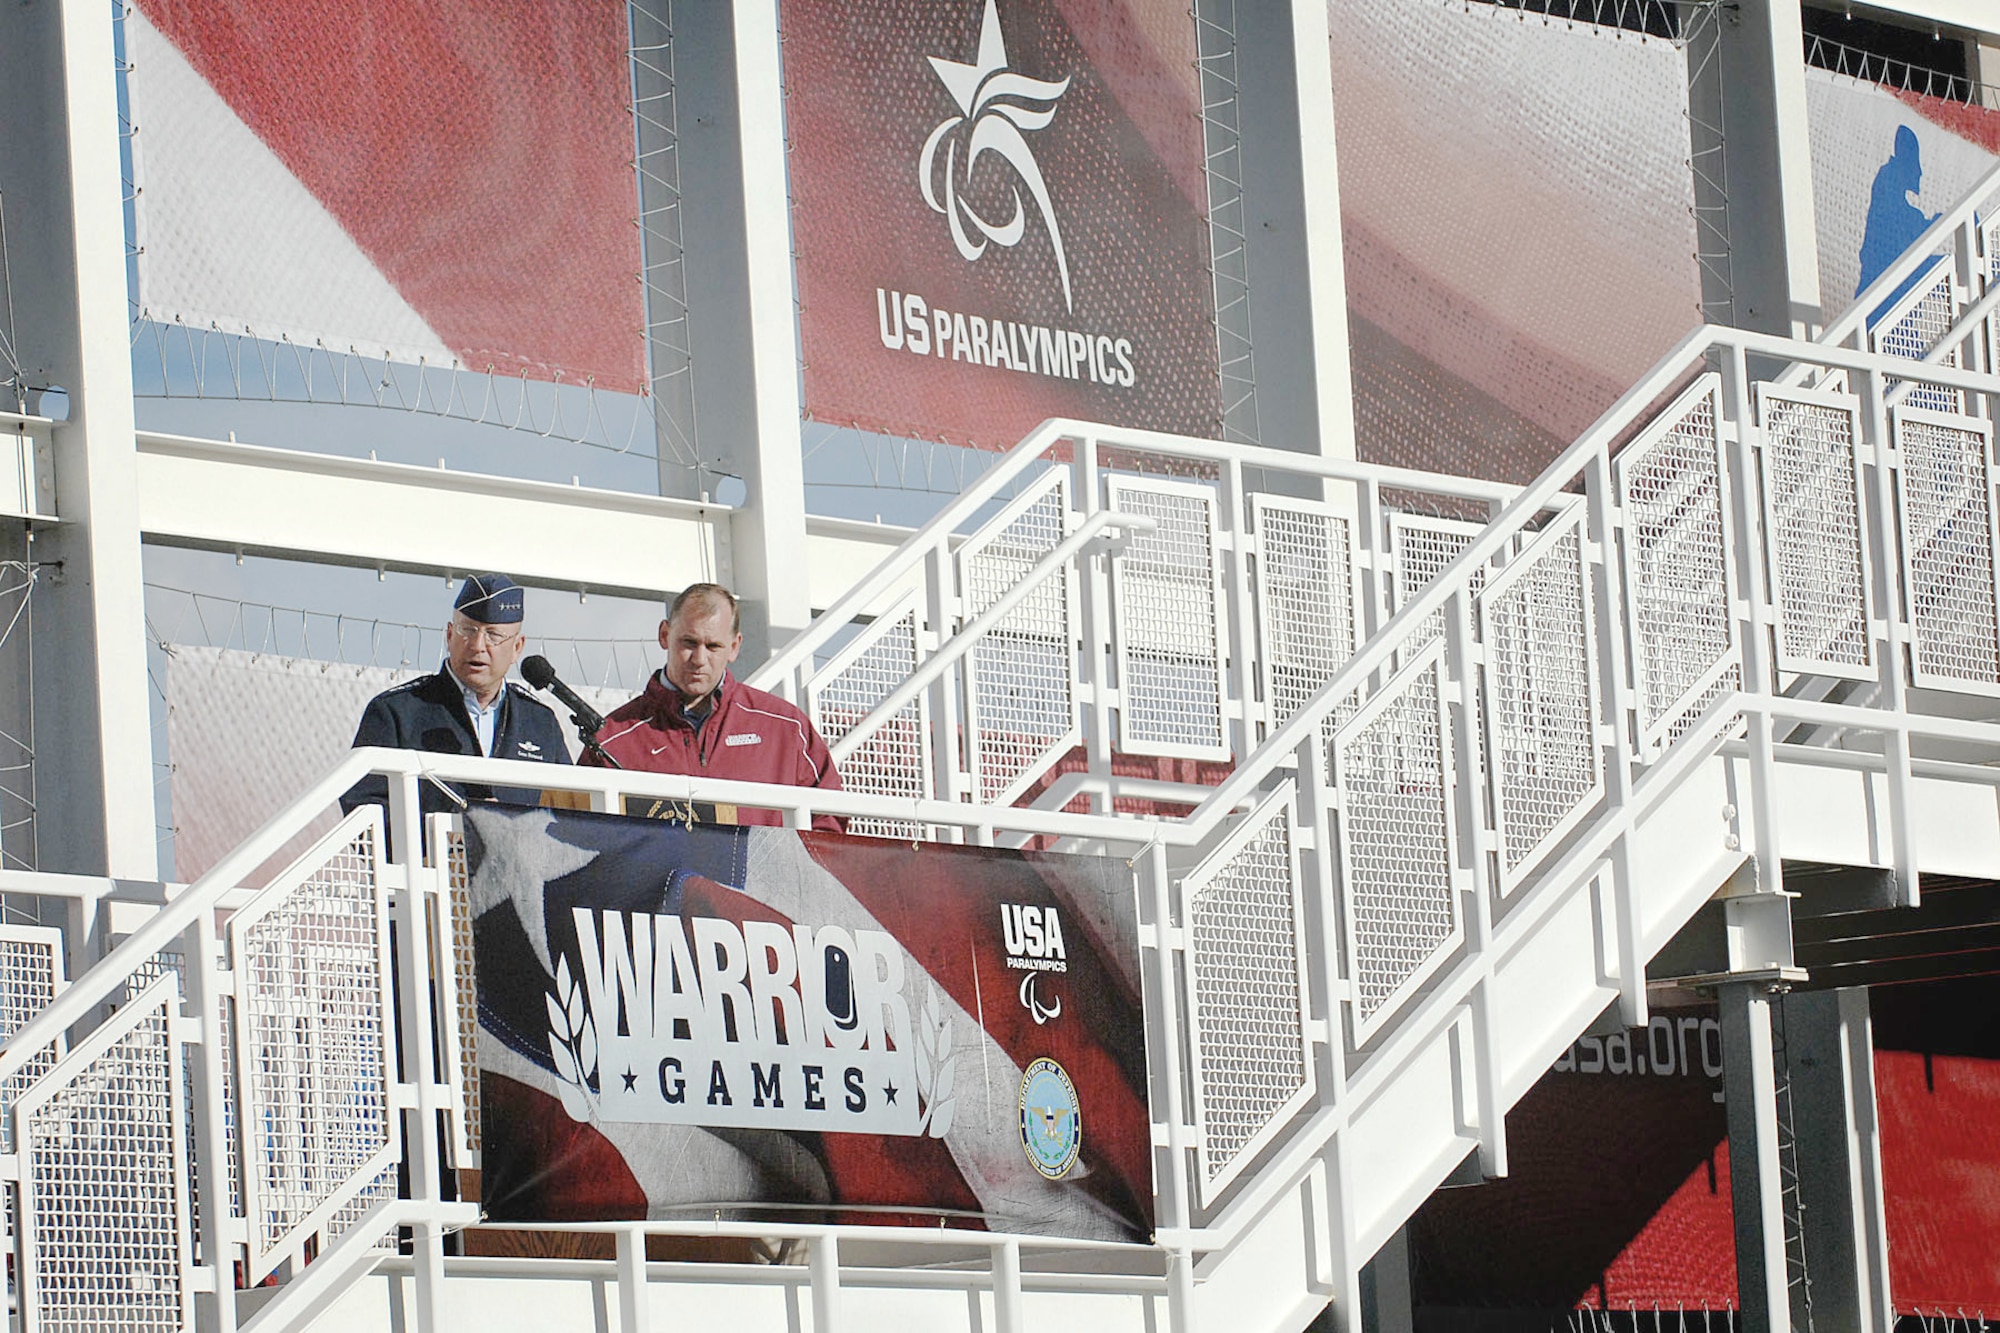 Gen. Victor E. Renuart Jr. speaks at the opening ceremonies of the inaugural Warrior Games May 10, 2010, at the Olympic Training Center in Colorado Springs, Colo. Also pictured is Charlie Huebner, the chief of U.S. Paralympics. General Renuart is the commander of U.S. Northern Command. (Defense Department photo/Fred W. Baker III)